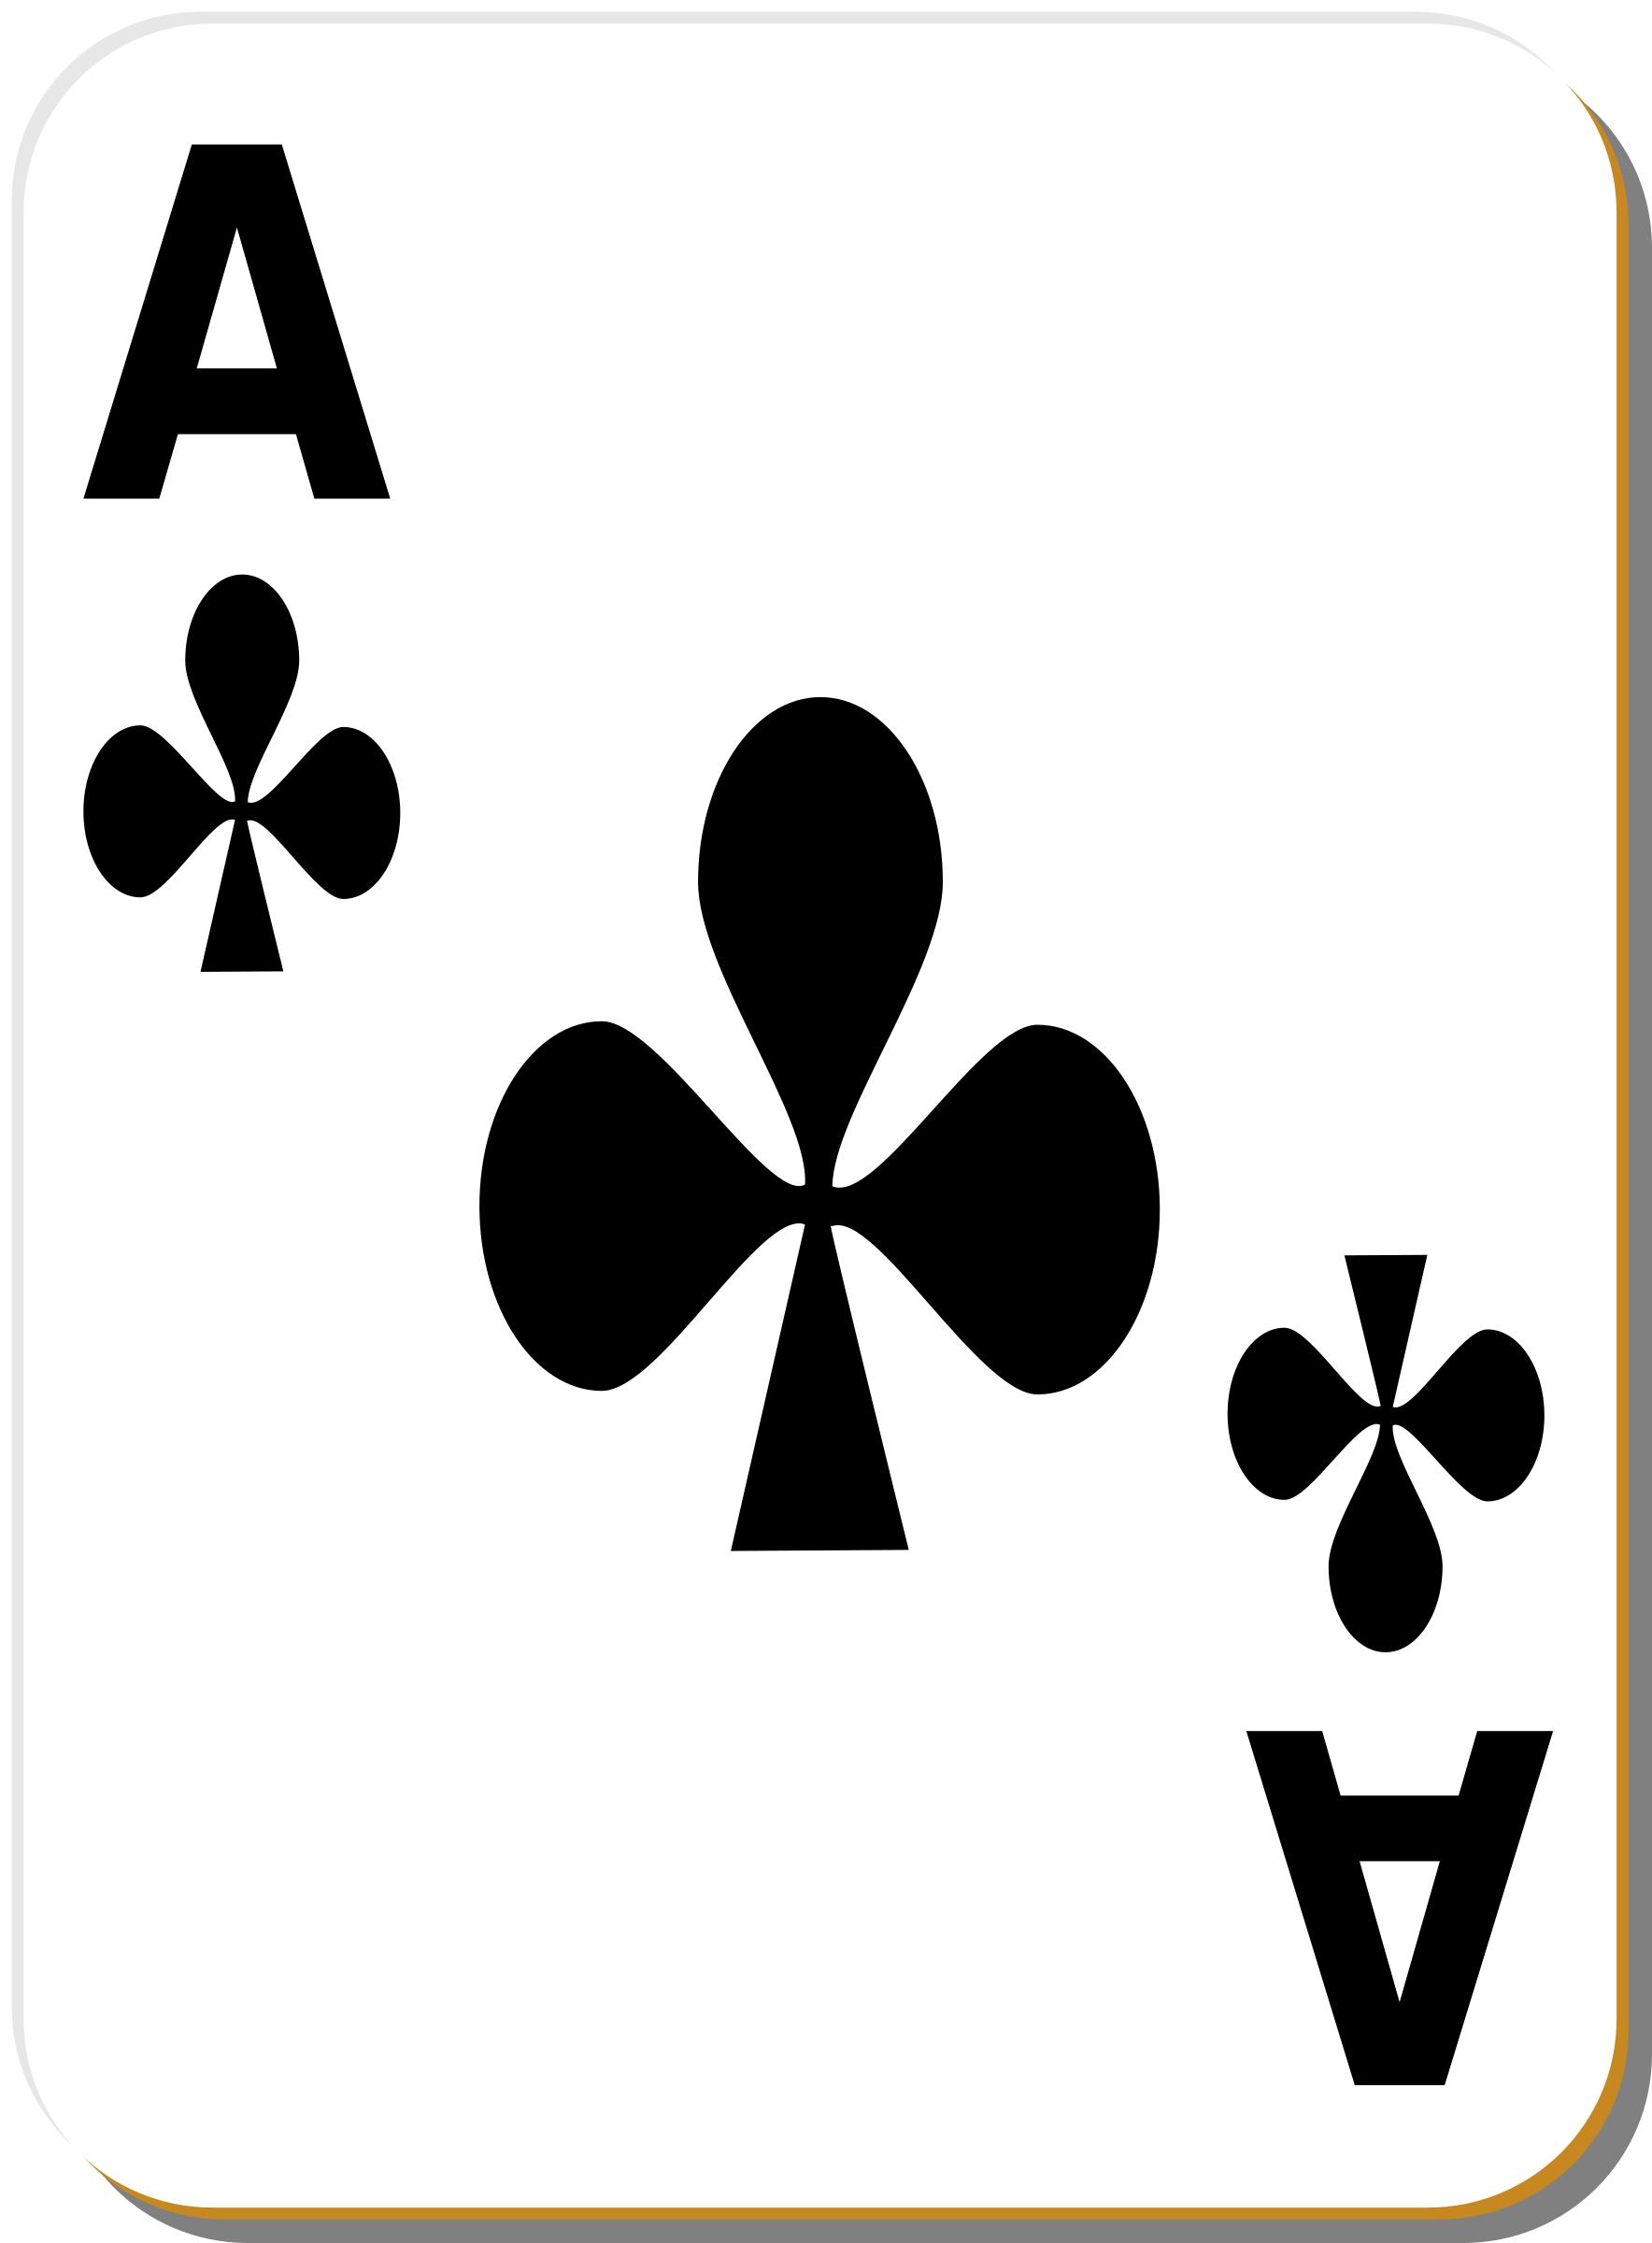 White deck: Ace of clubs icons